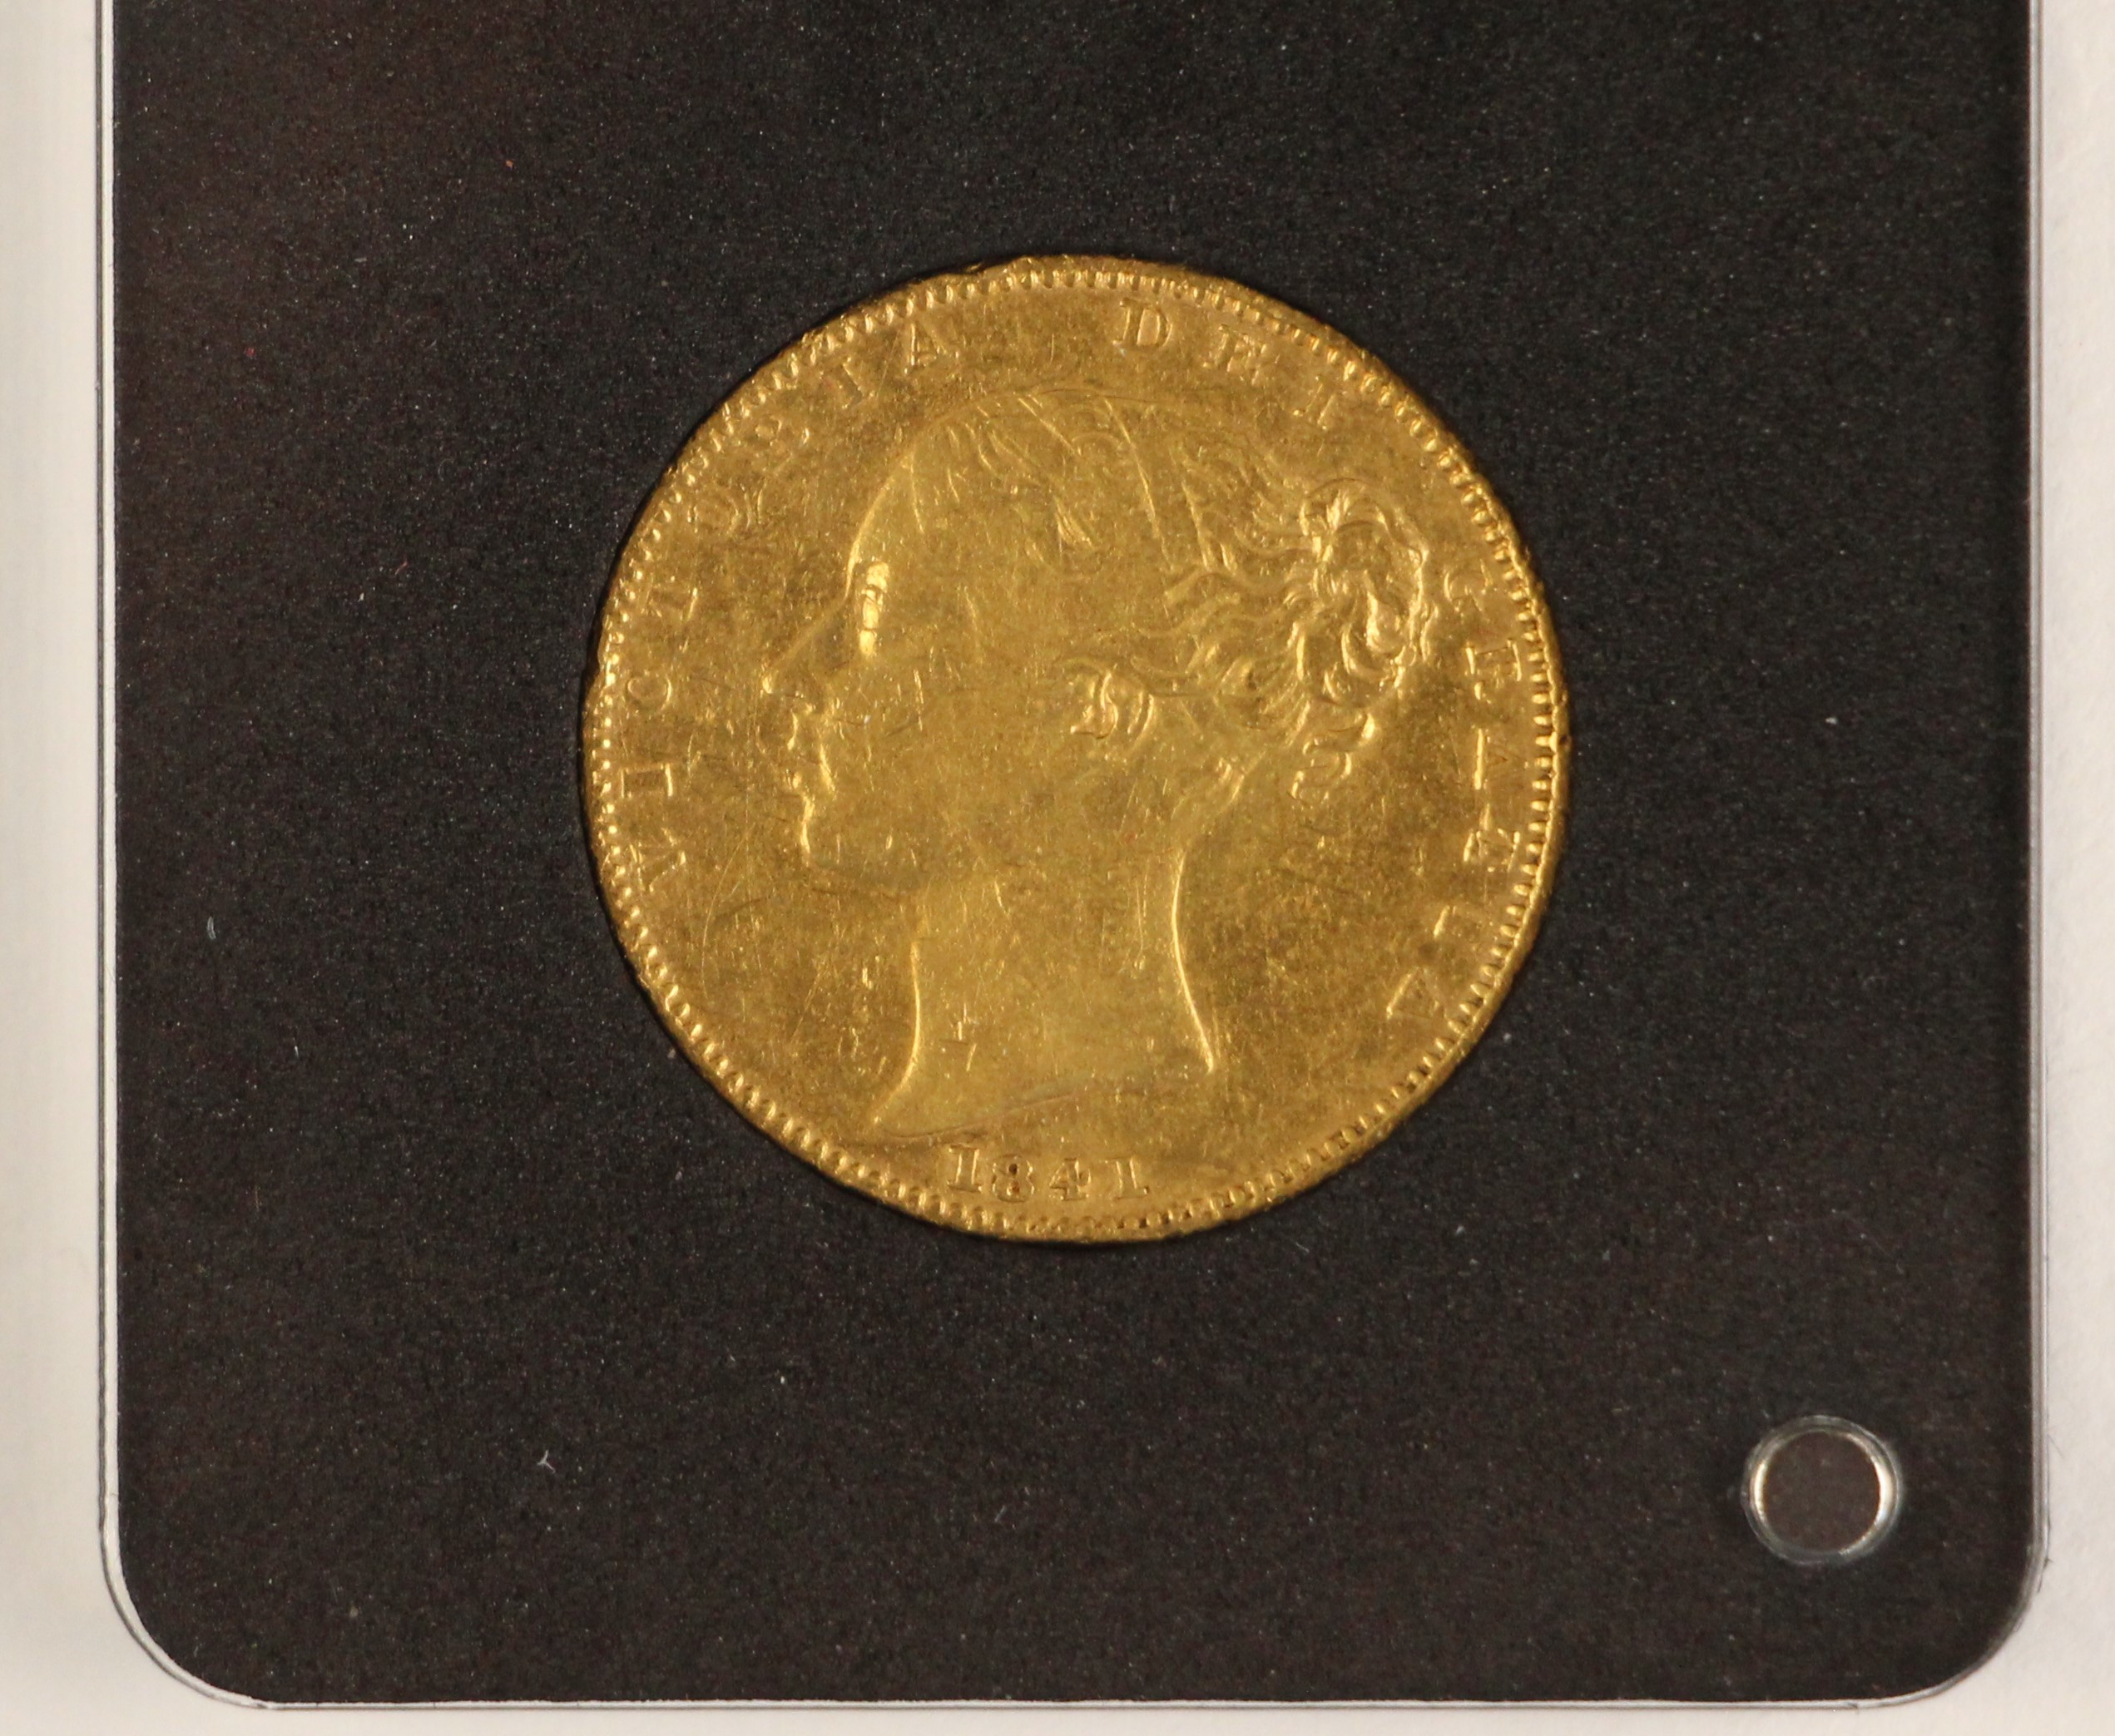 Victoria (1837-1901), Full Sovereign, 1841, unbarred, London Mint, young head Victoria with shield - Image 4 of 5